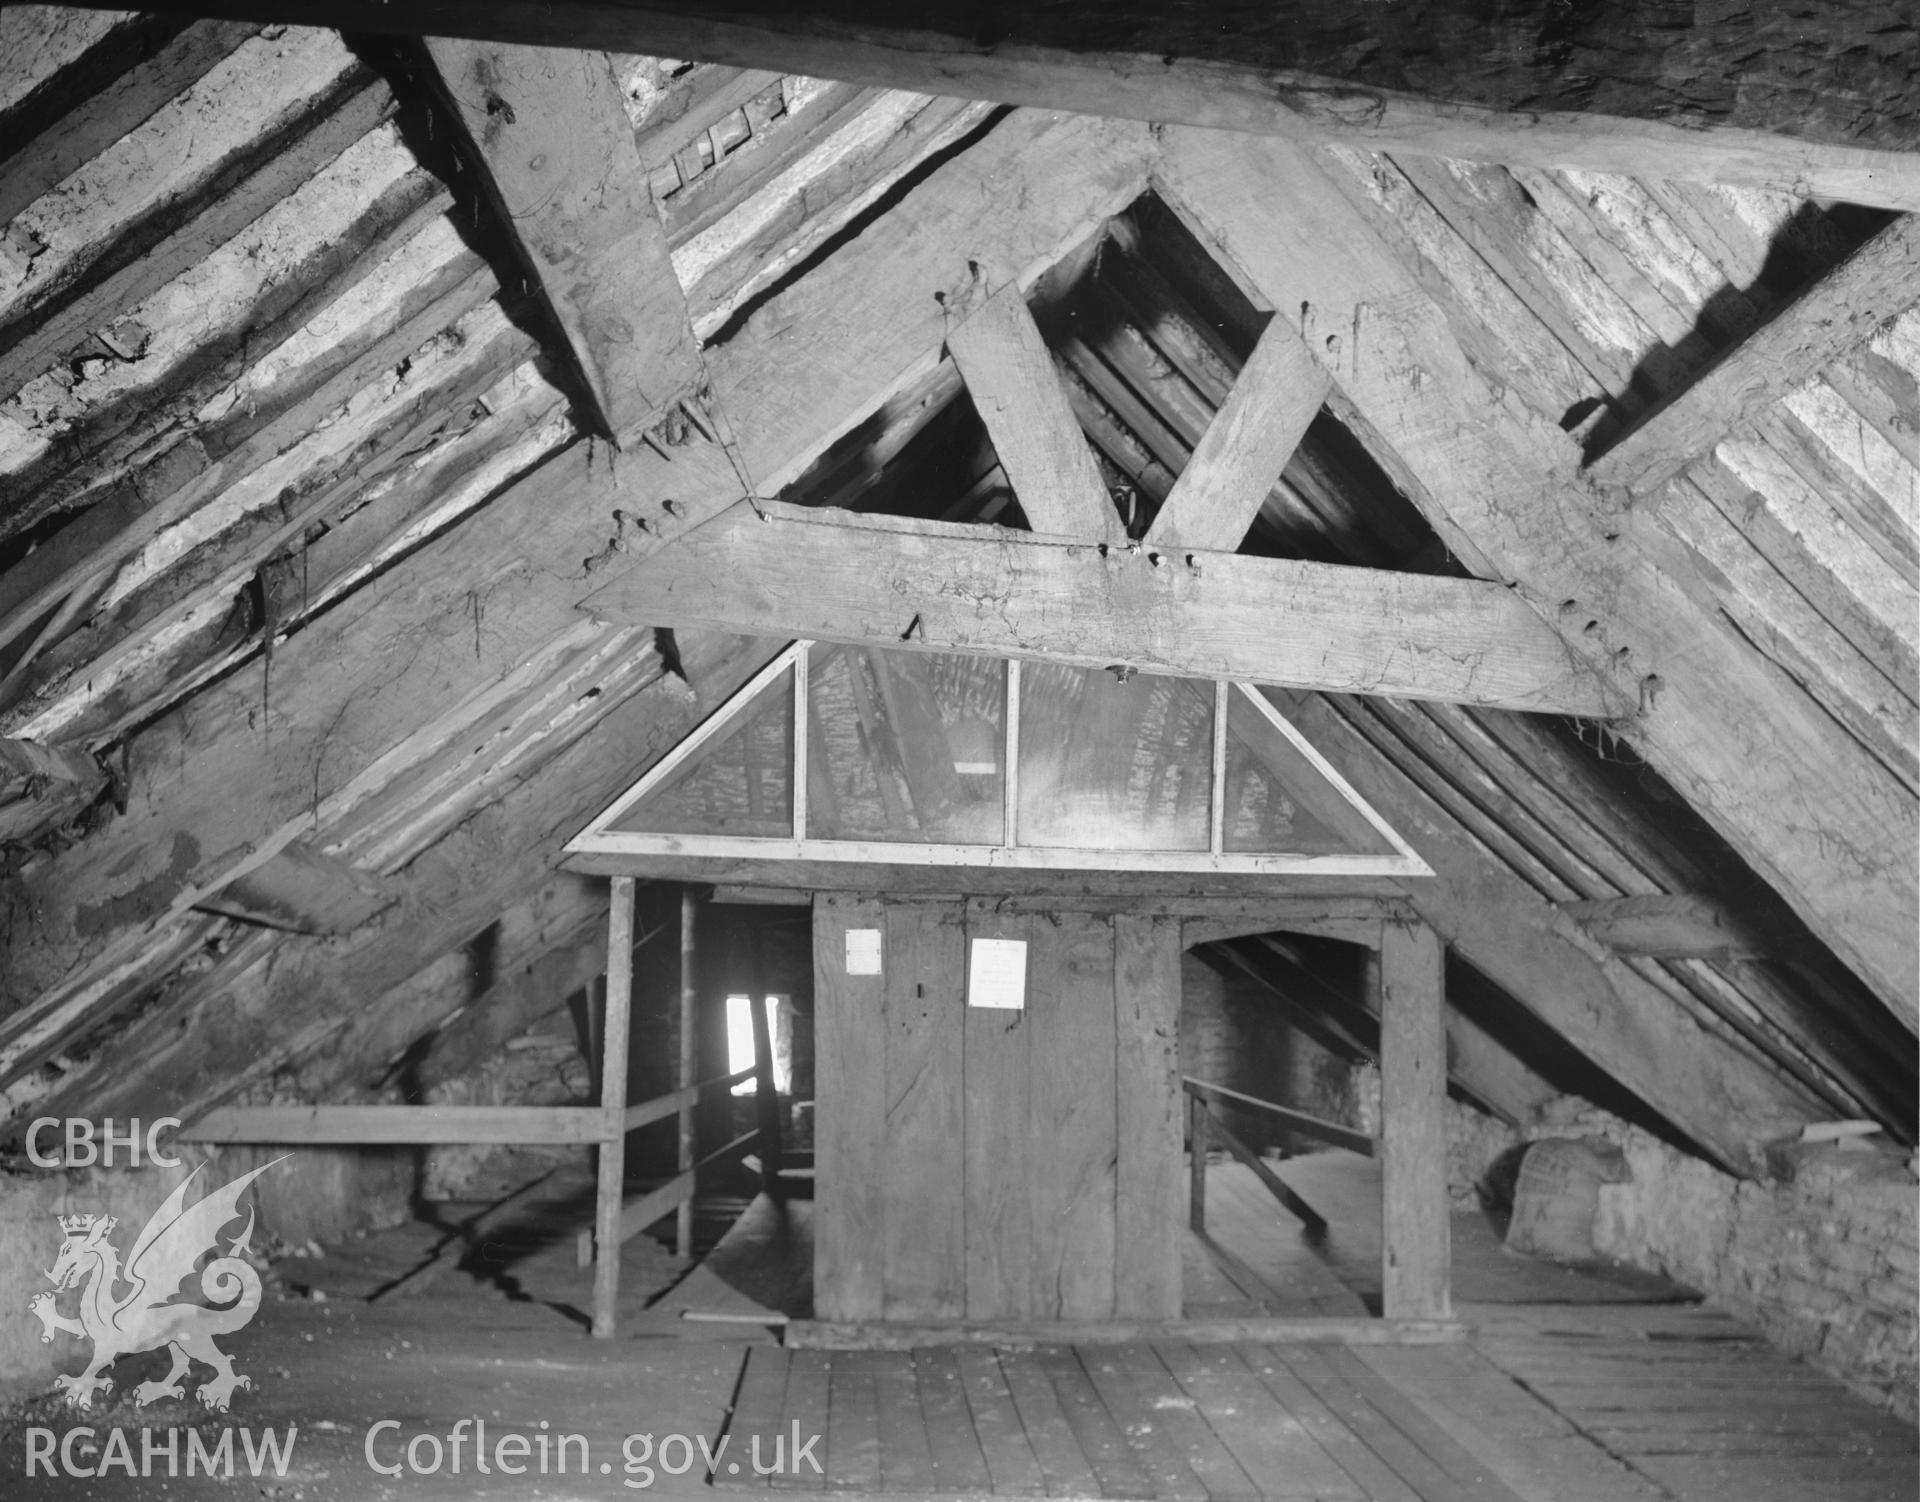 Interior view of Parlwr Mawr, Conwy showing roof space, taken 01.01.1947.